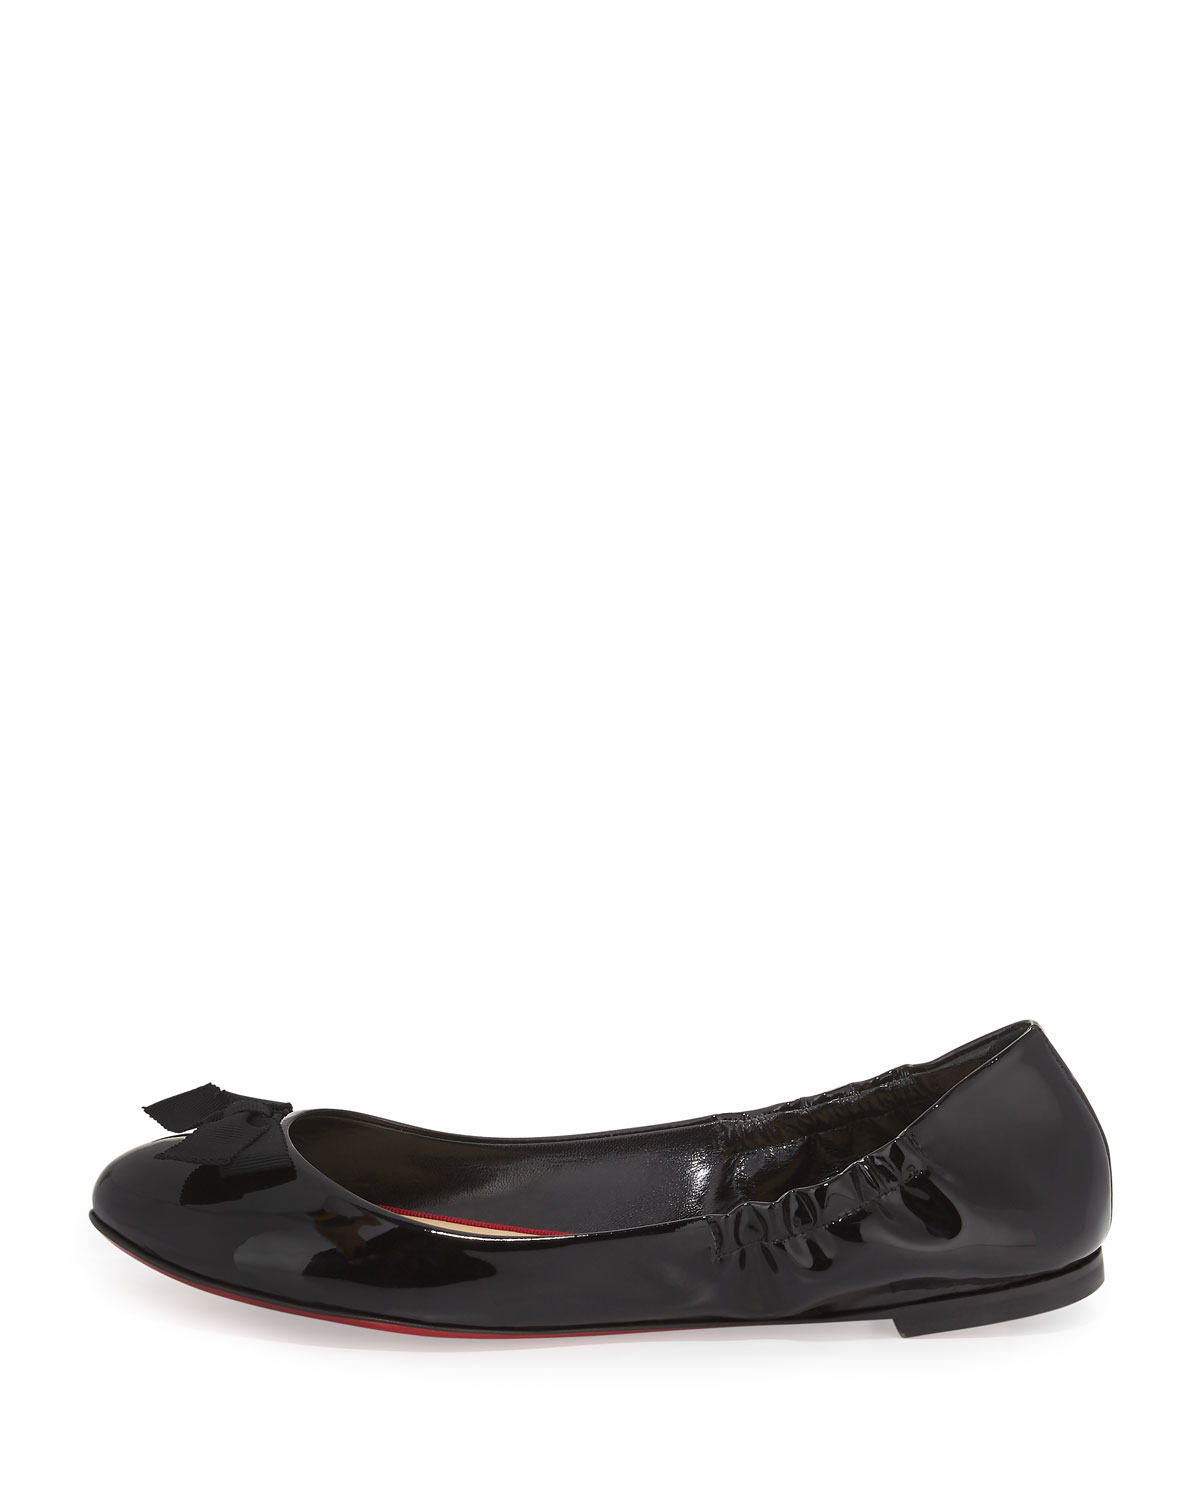 Christian louboutin Gloriana Patent-Leather Ballet Flats in Black ...  